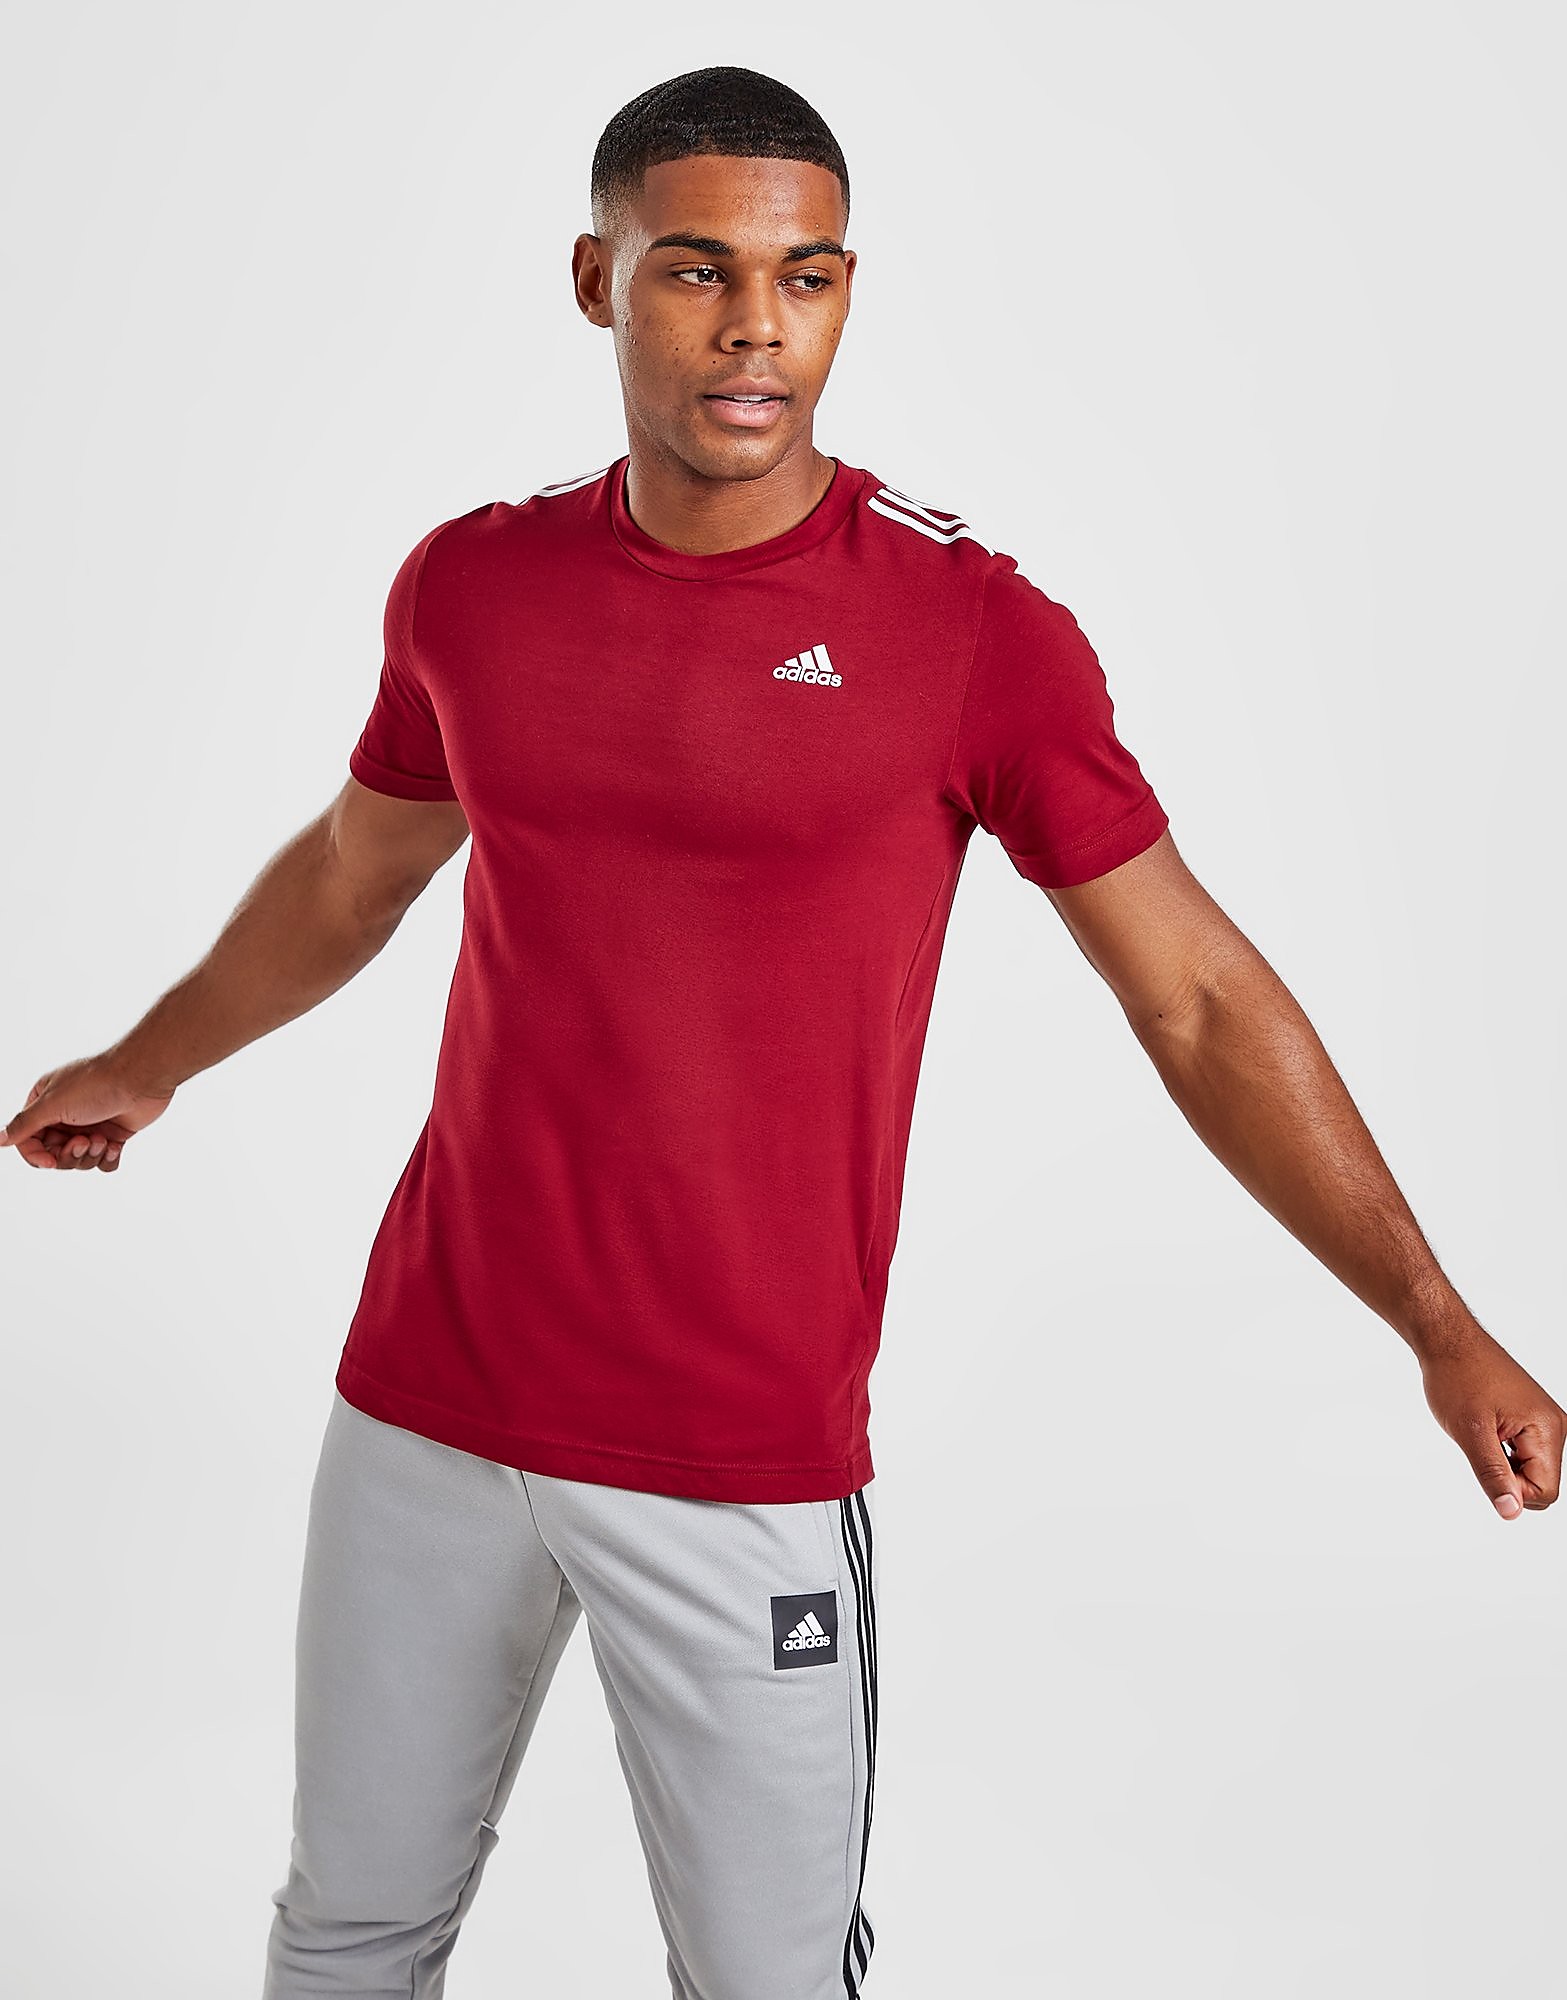 

adidas Badge of Sport 3-Stripes T-Shirt - Only at JD - RED/BURG - Mens, RED/BURG